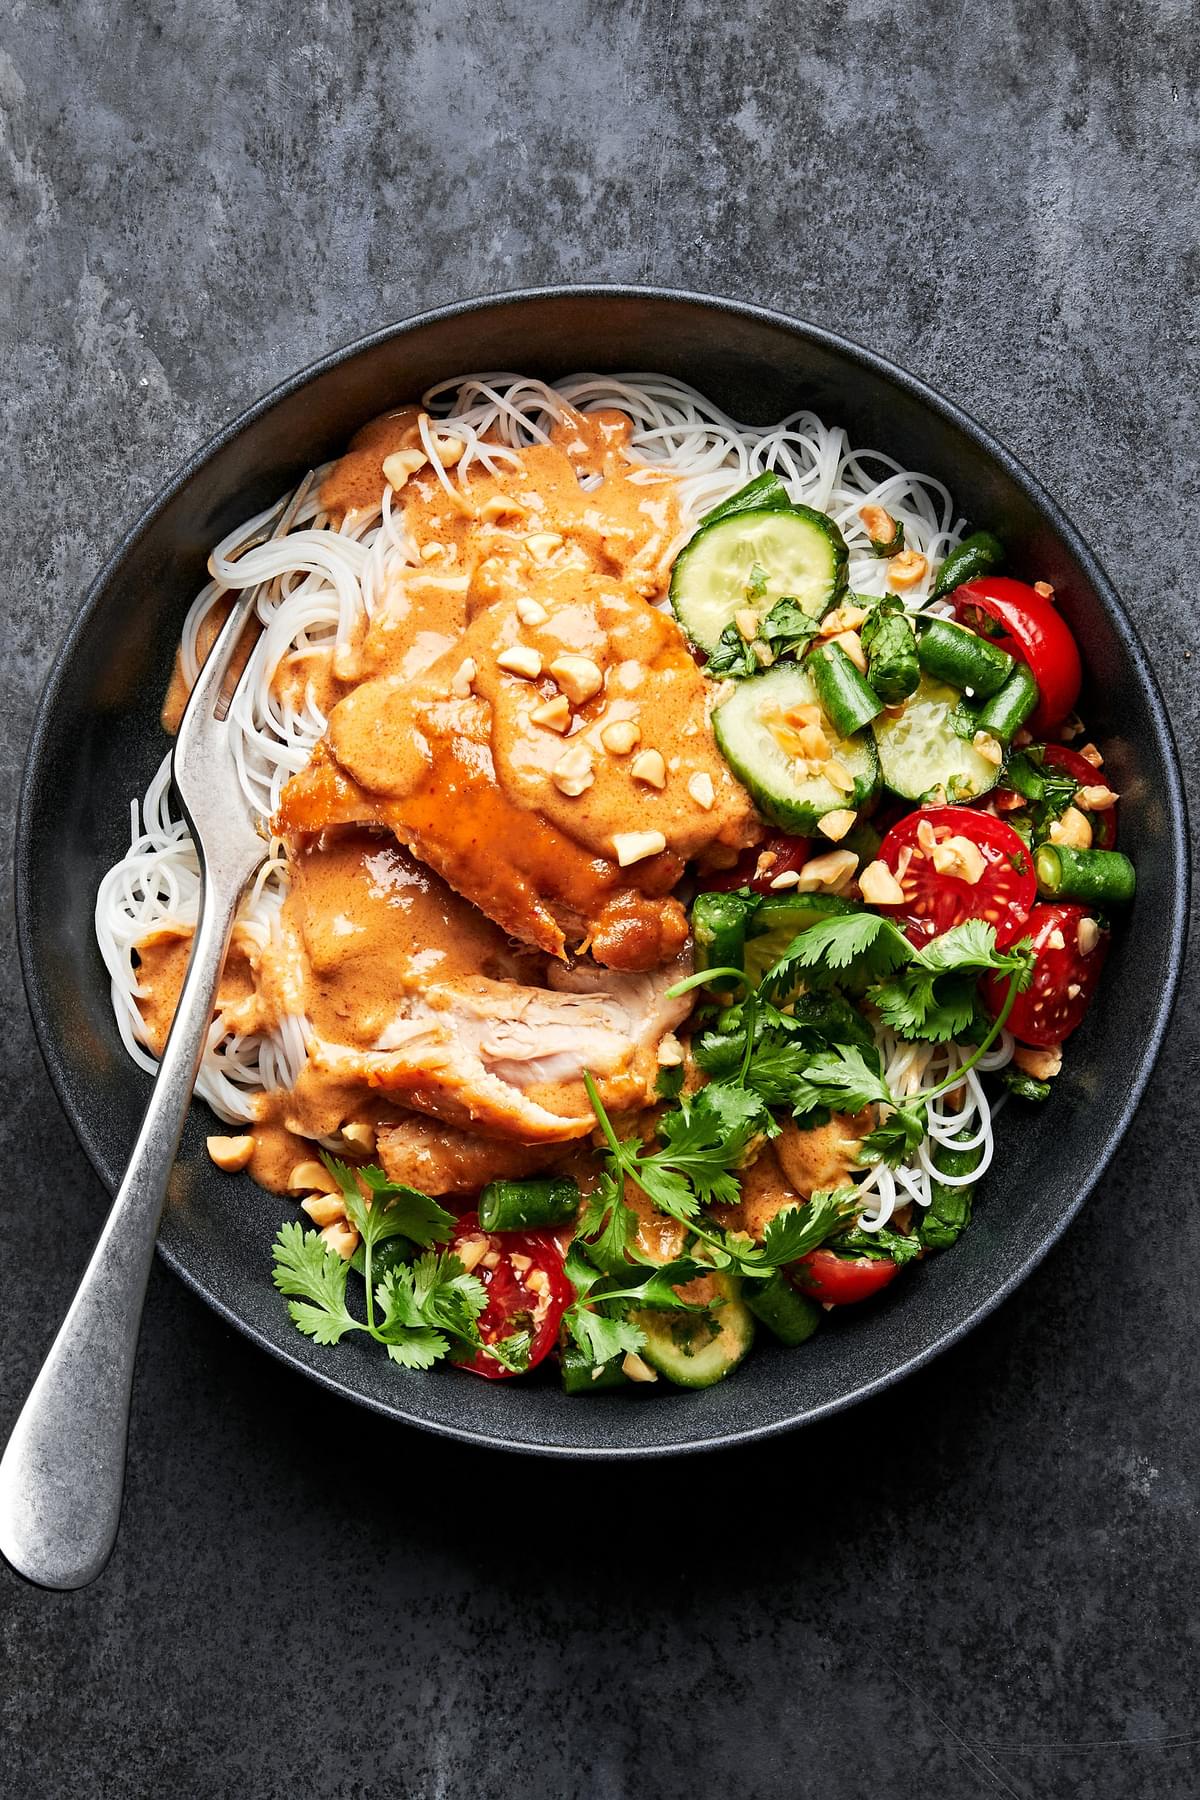 a peanut chicken noodle bowl made with rice noodles topped with chicken, peanut sauce, green bean & tomato salad & cilantro